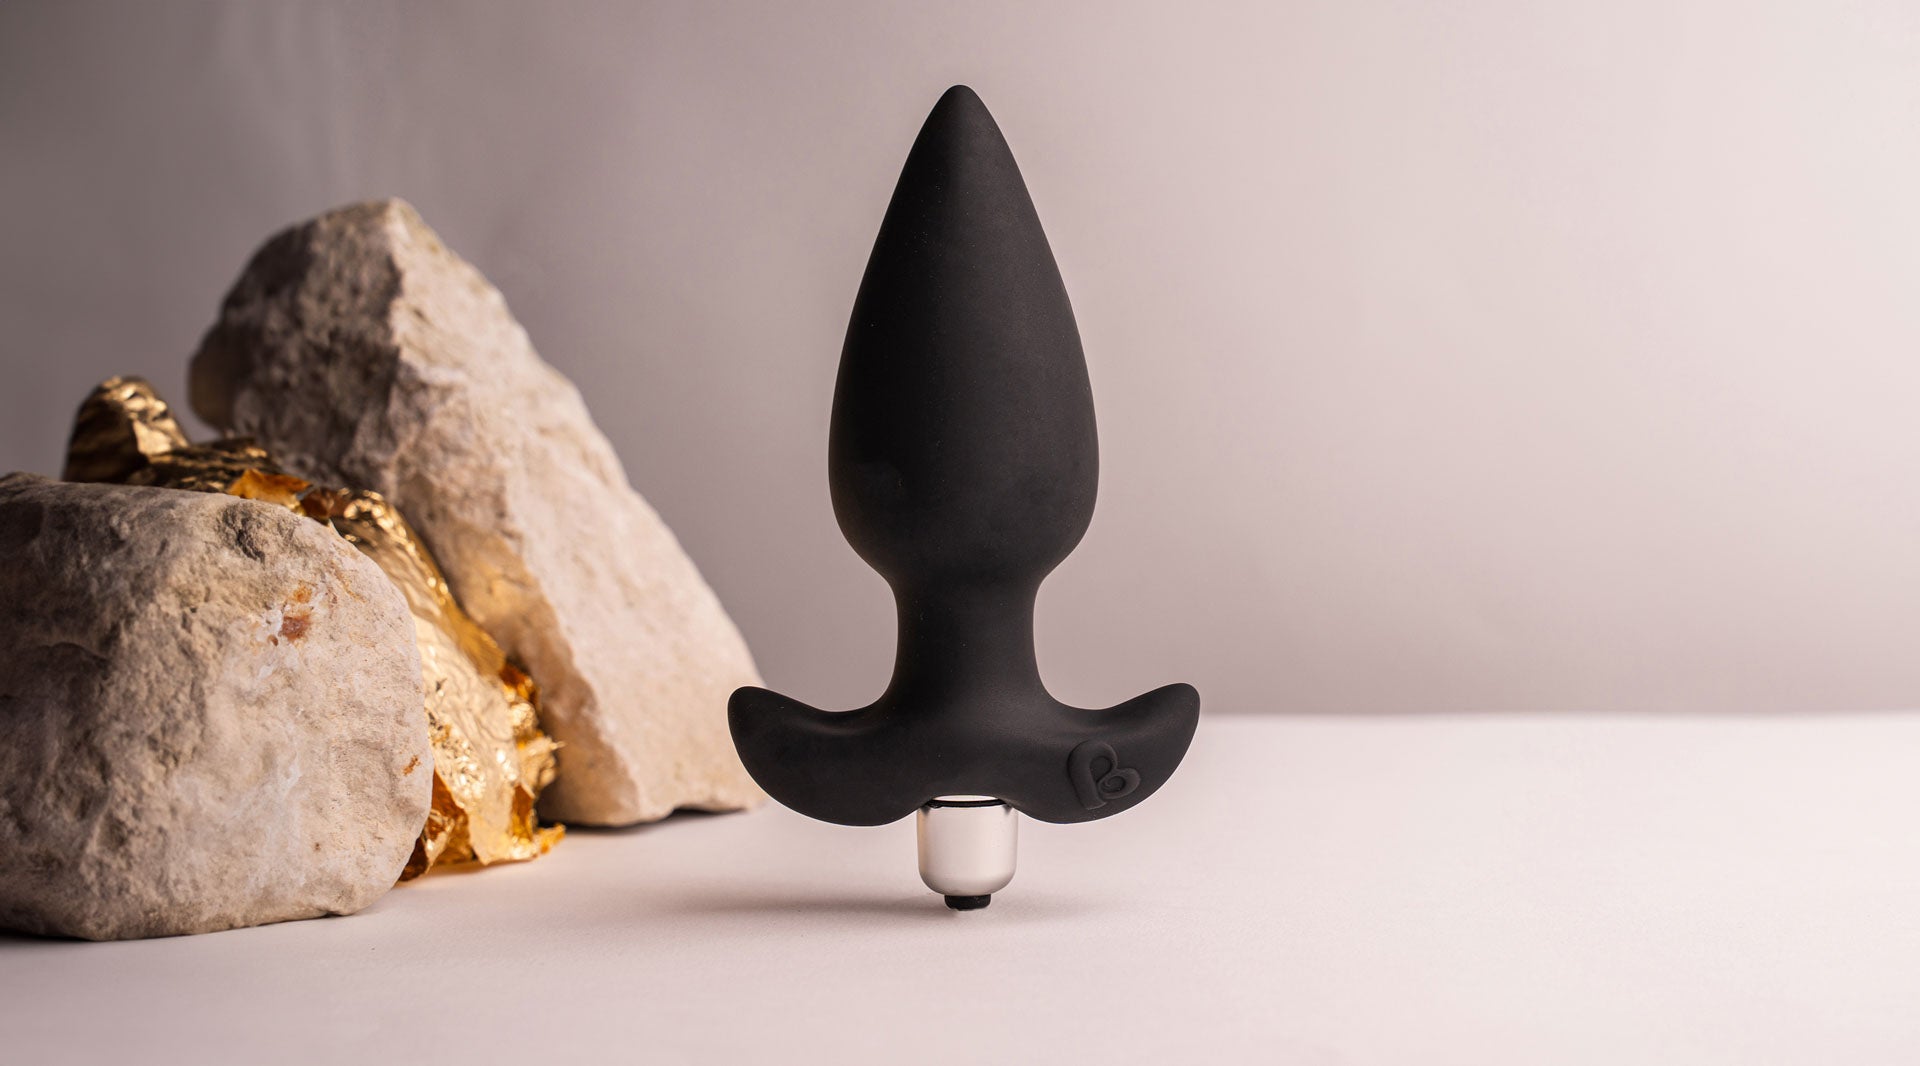 Black silicone tapered tip butt plug with a flared based housing a removable bullet vibrator.